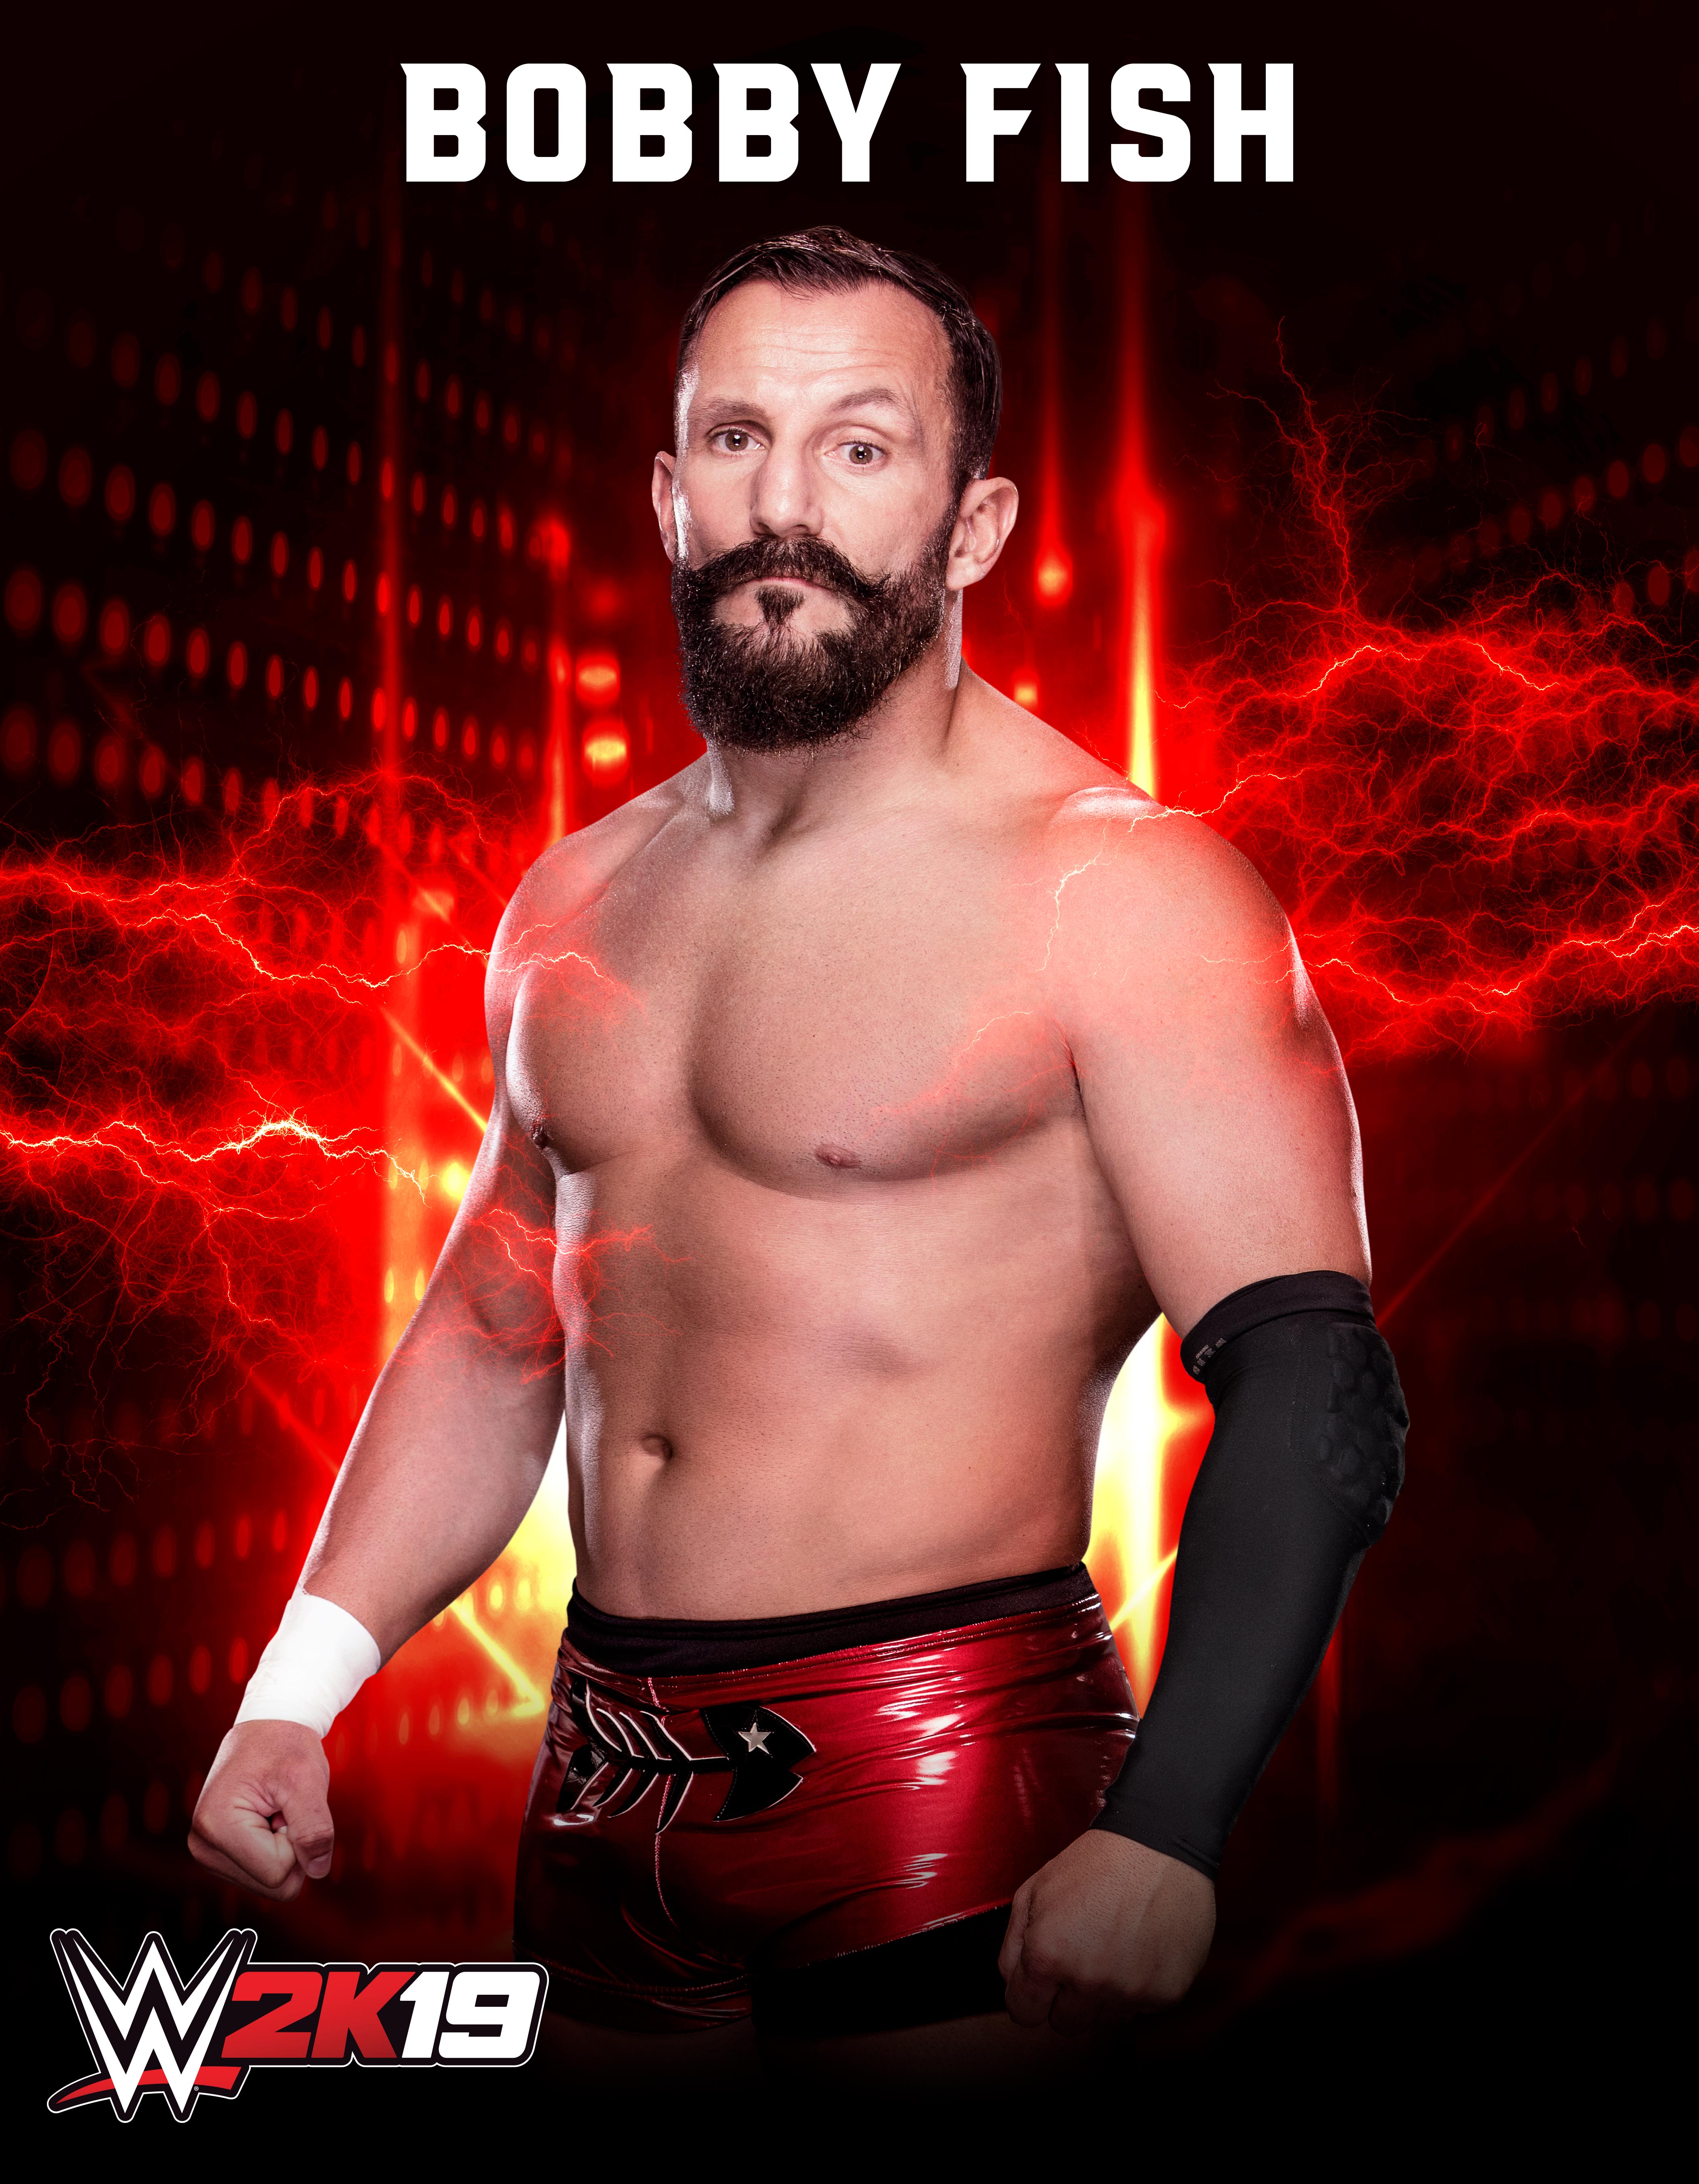 Wwe2k19 Roster Bobby Fish